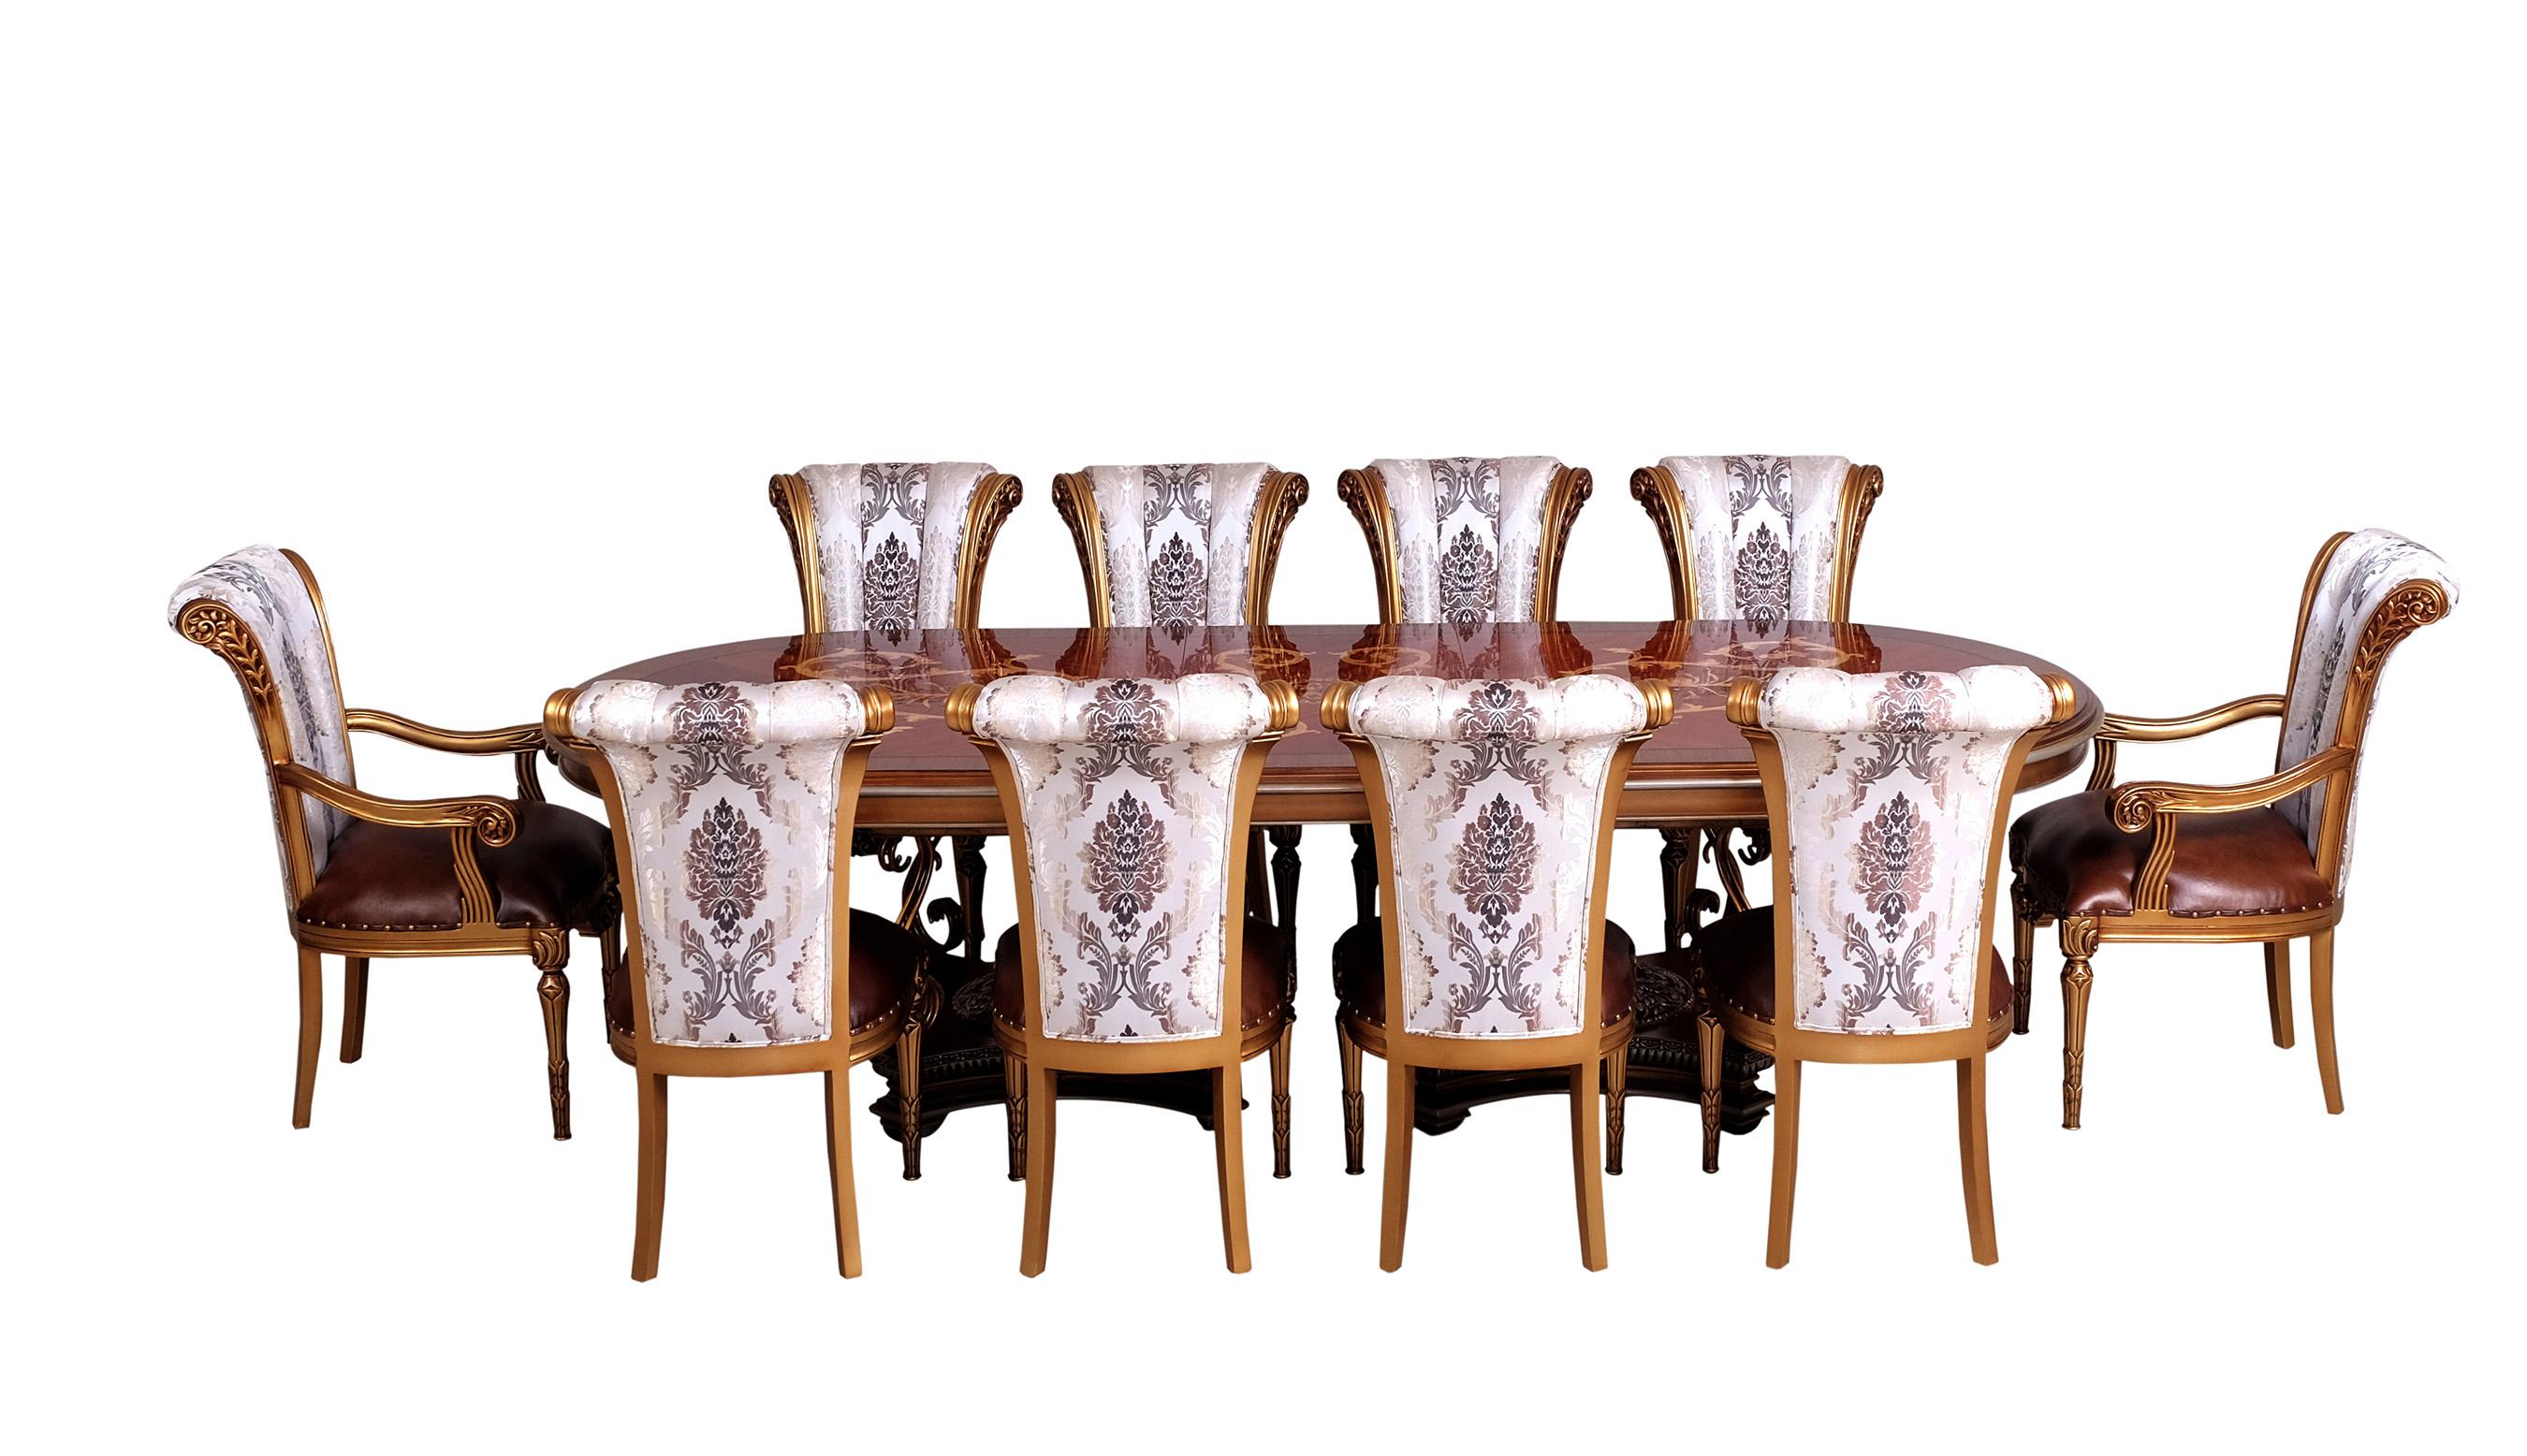 Classic, Traditional Oval Dining Table Set VALENTINA 51955-DT-Set-11 in Brown Leather